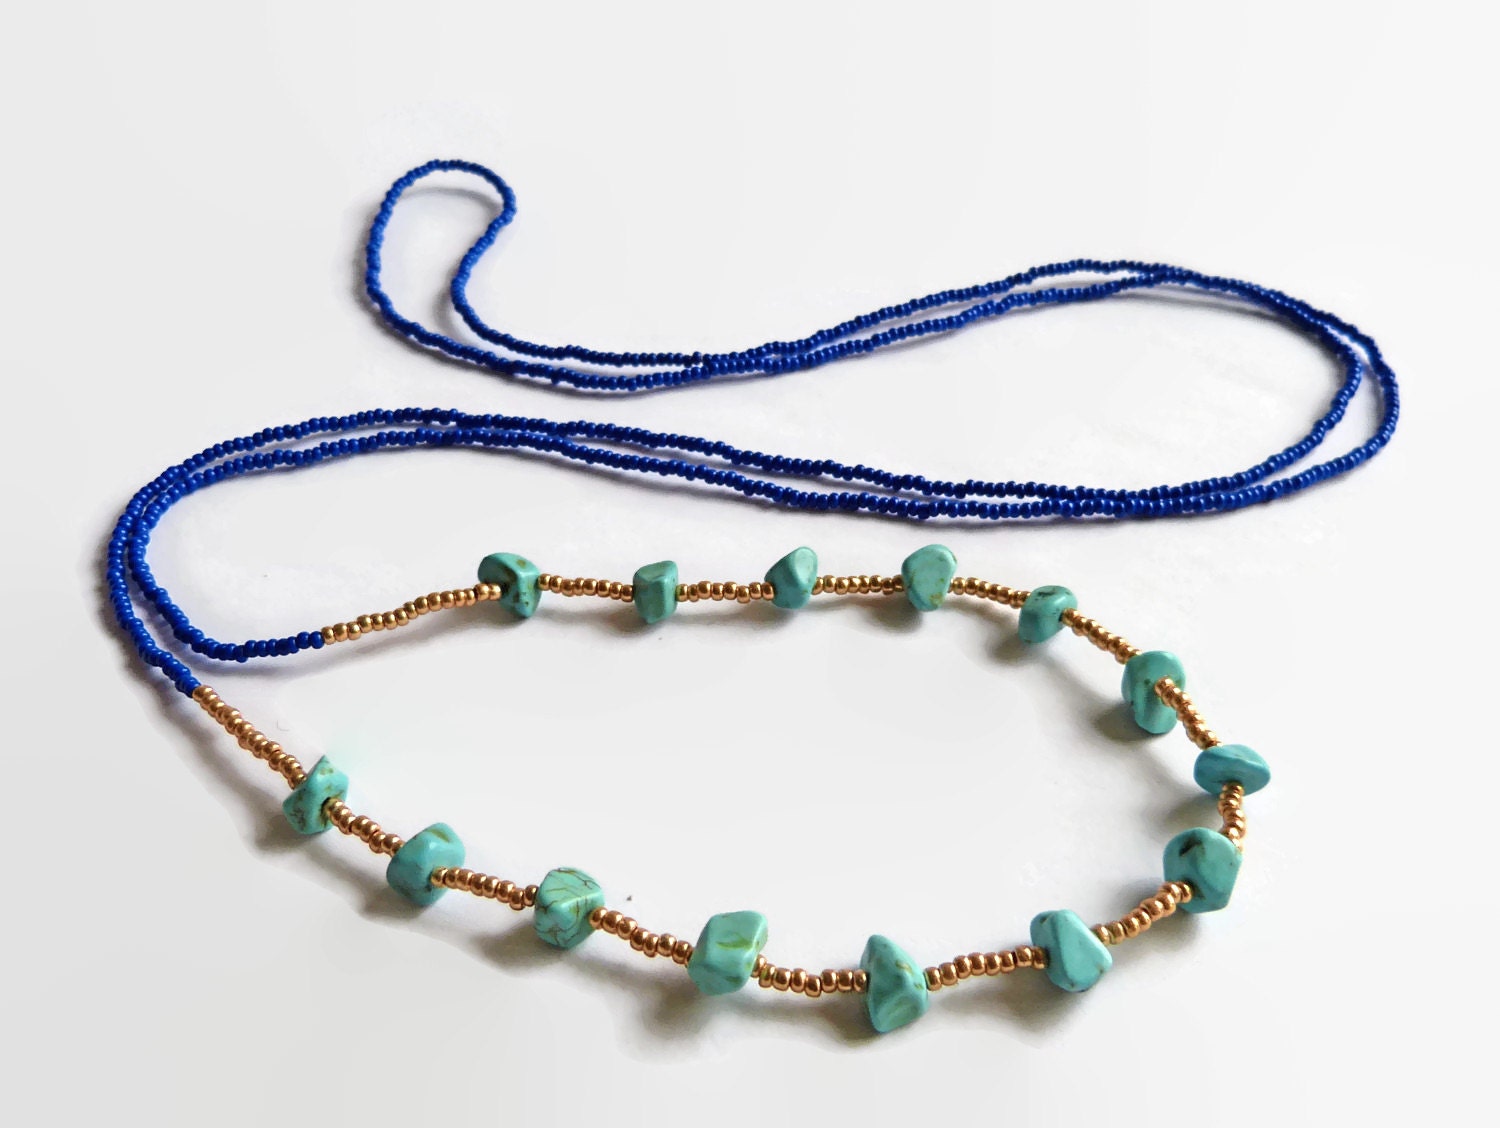 Seed bead necklace layer necklace boho chic blue by xEsFunThings